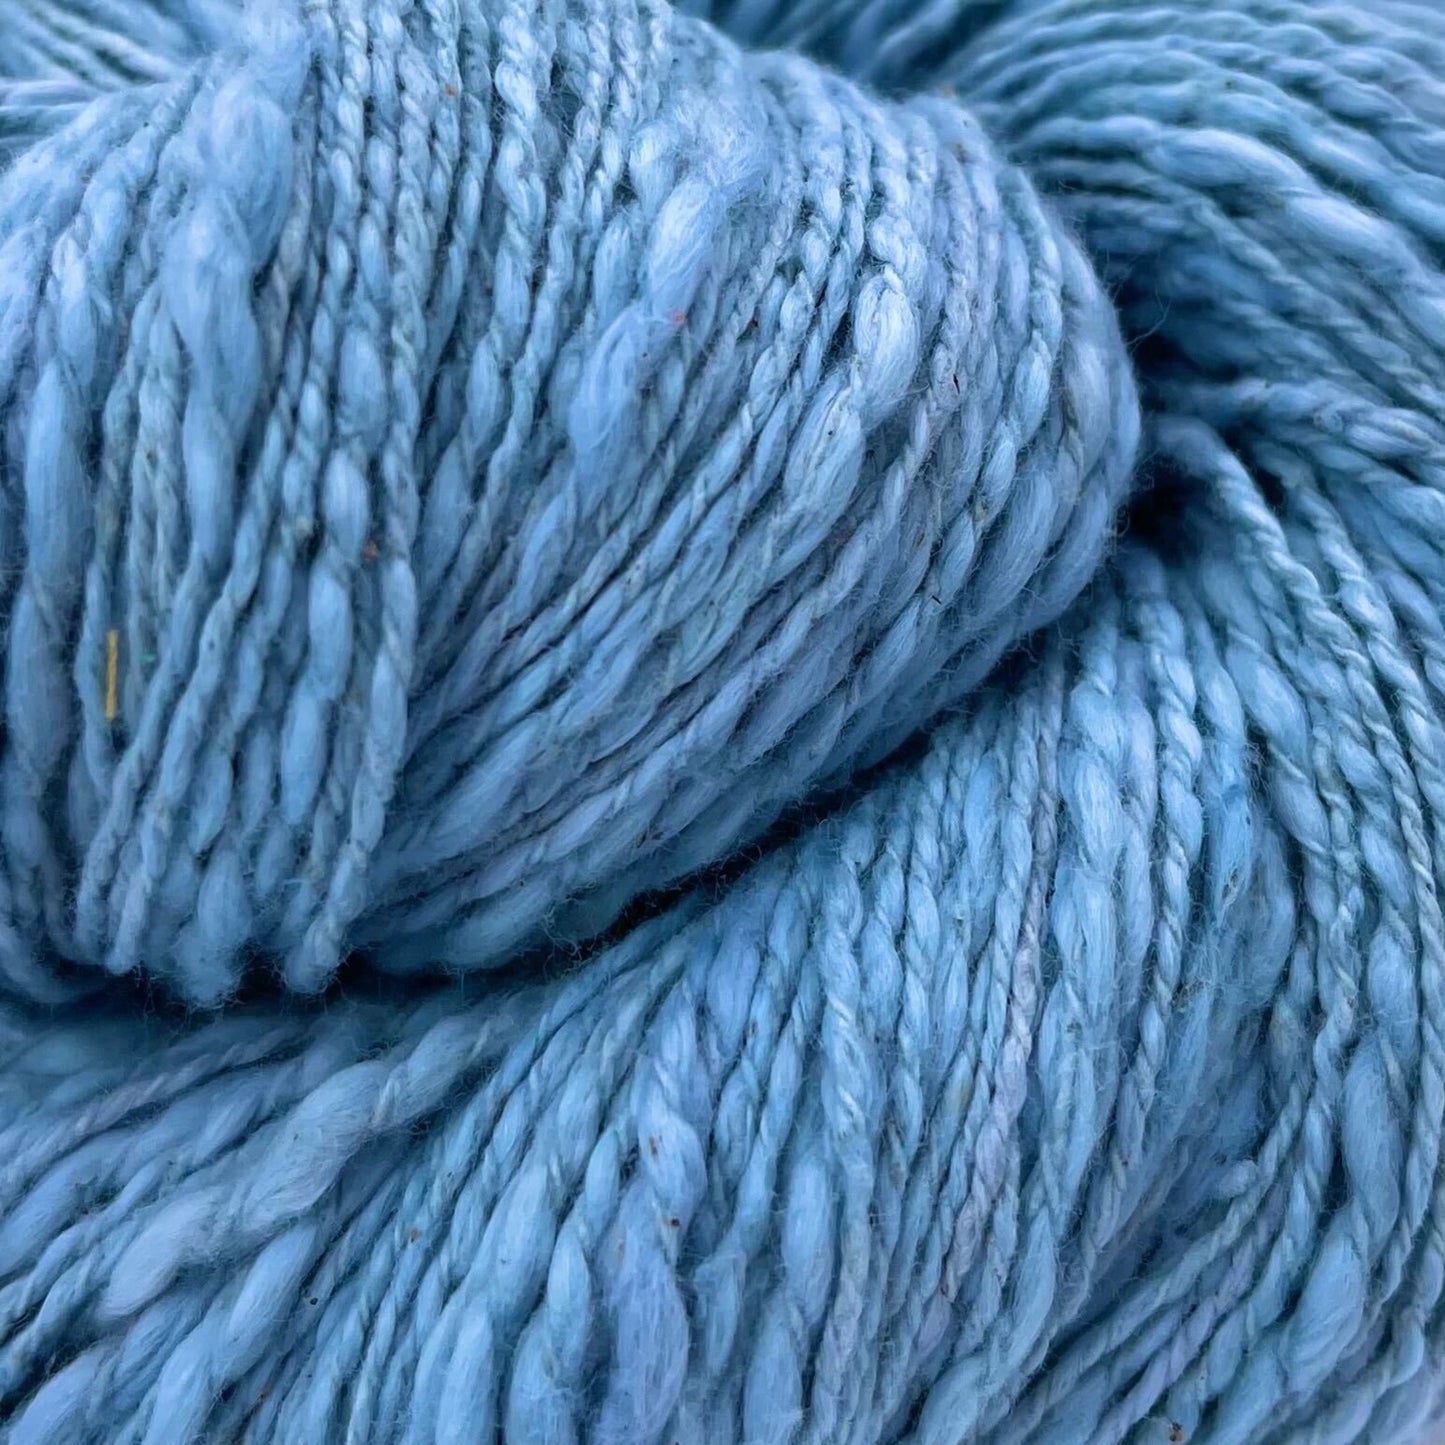 A close up of a skein of light blue cotton yarn on a white background